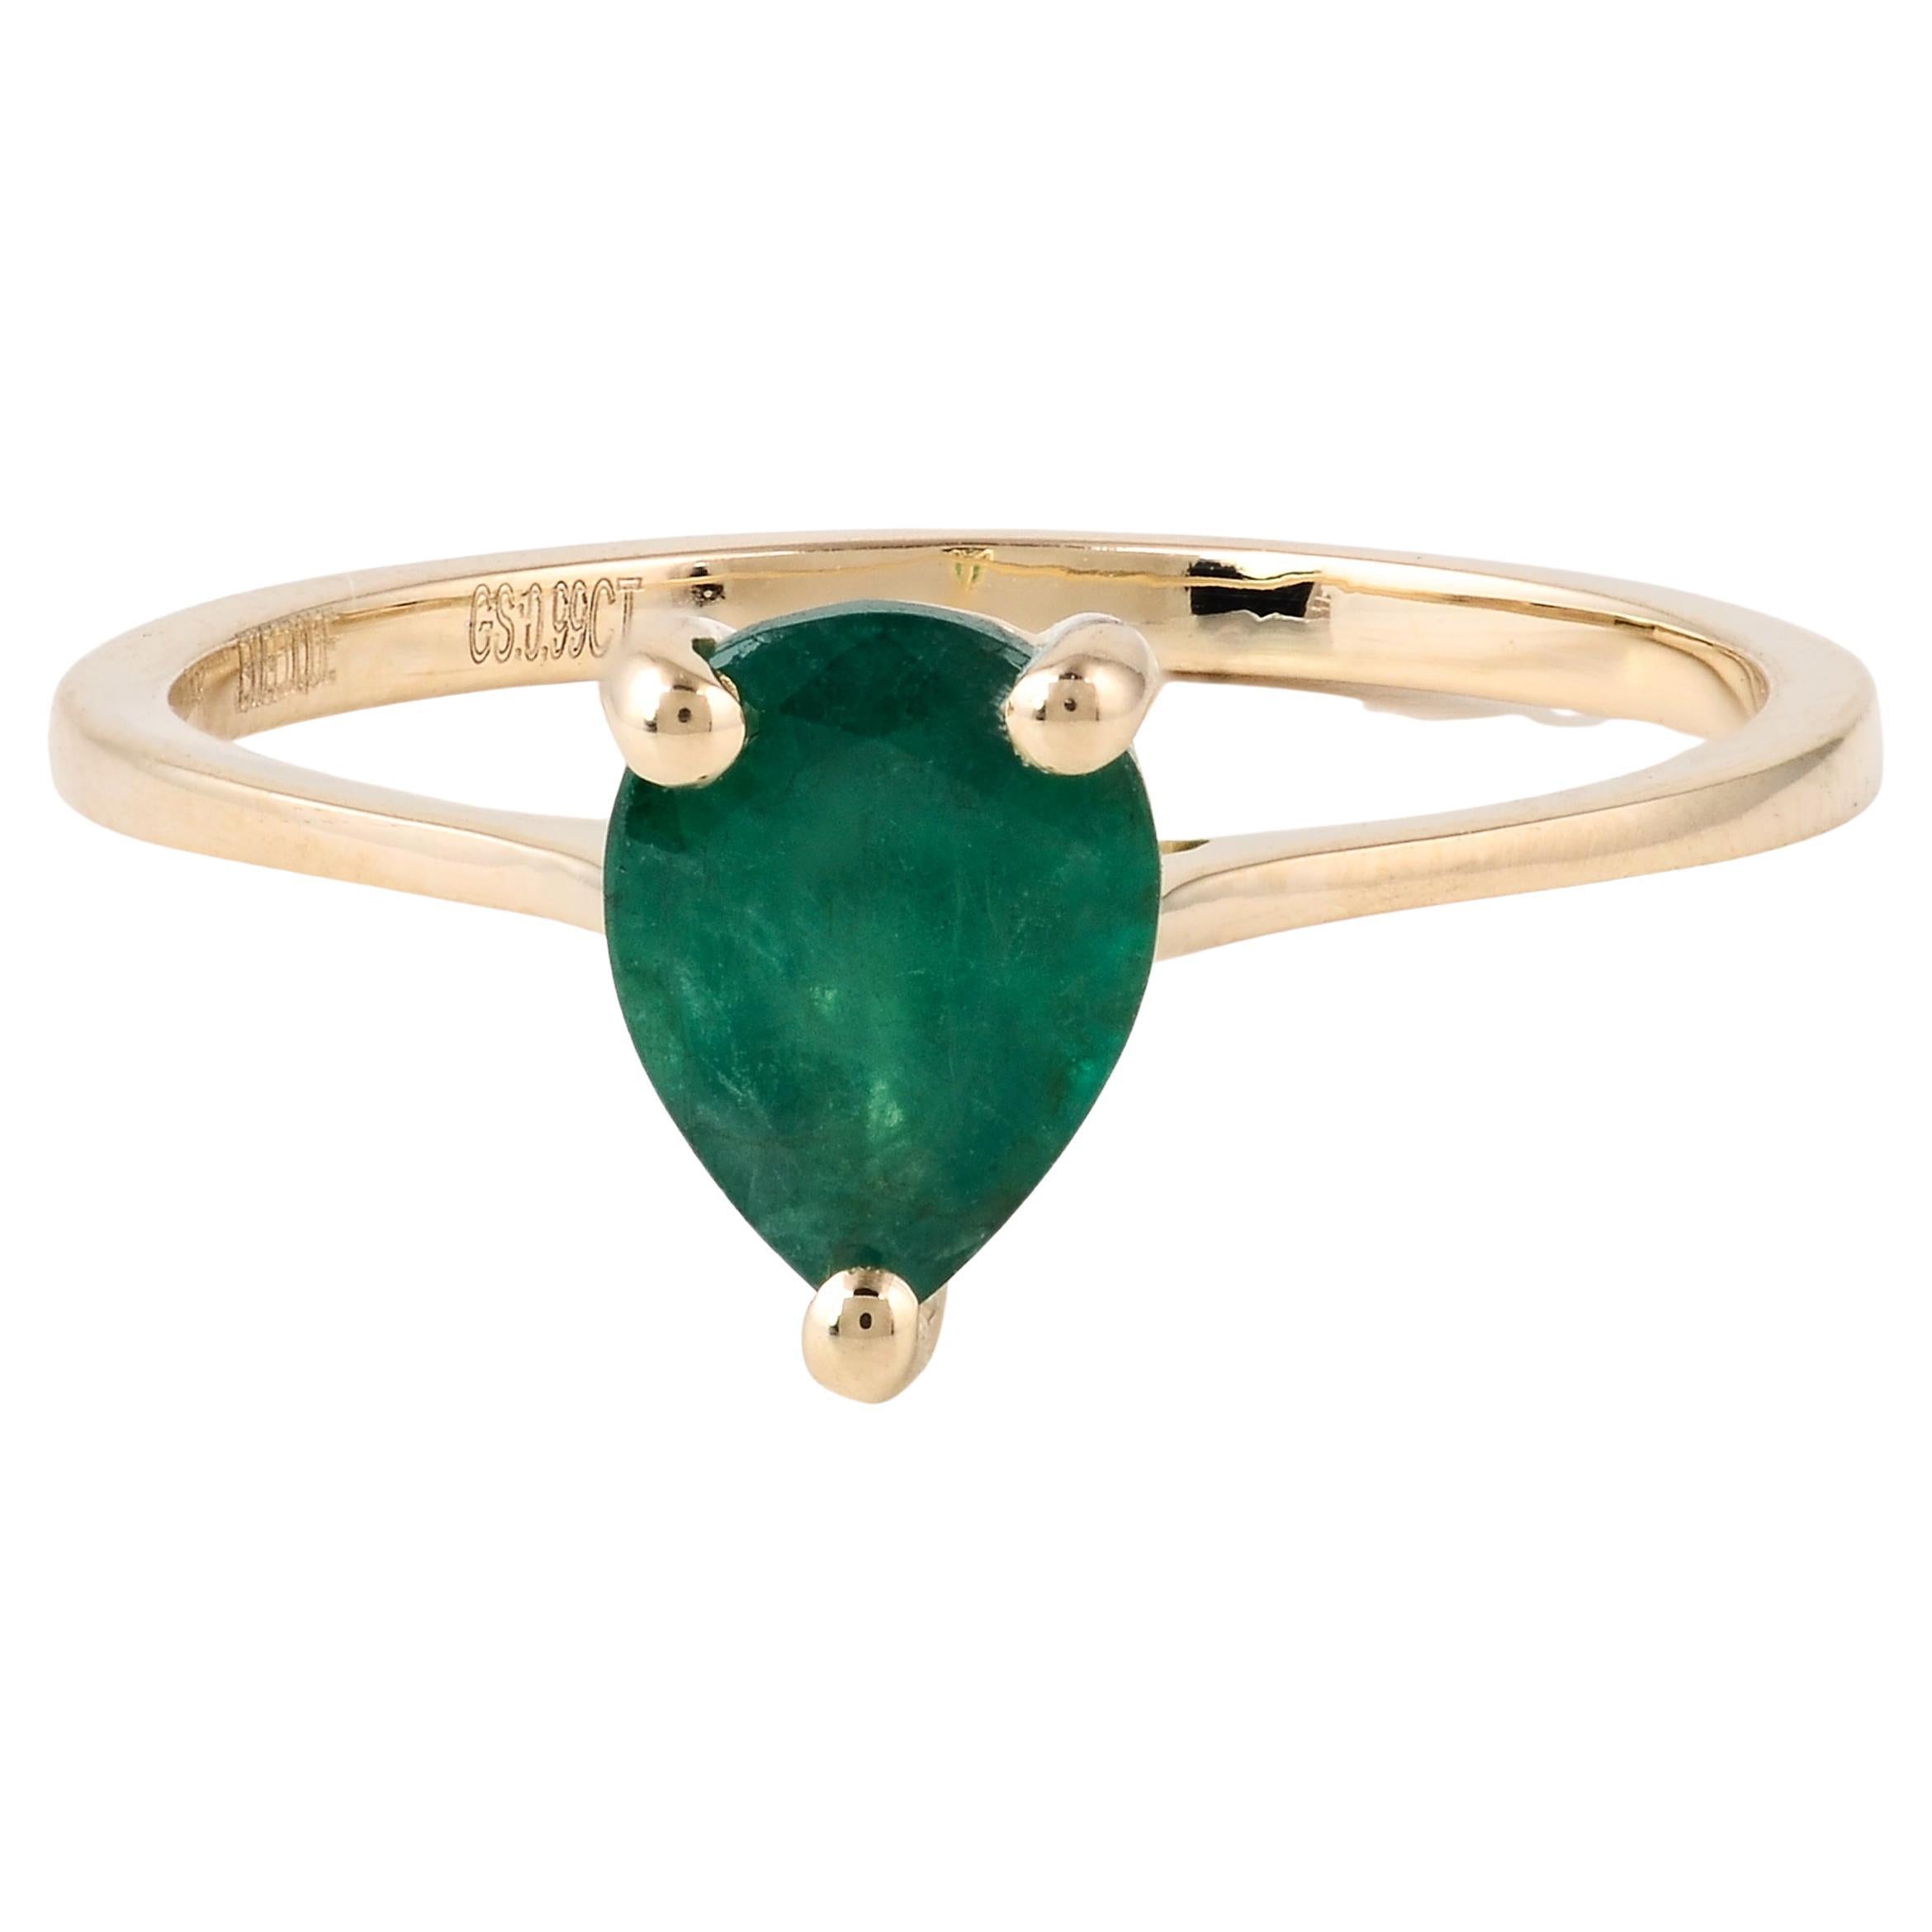 Elegant 14K Emerald Cocktail Ring, Size 6.75 - Luxurious Statement Jewelry Piece For Sale